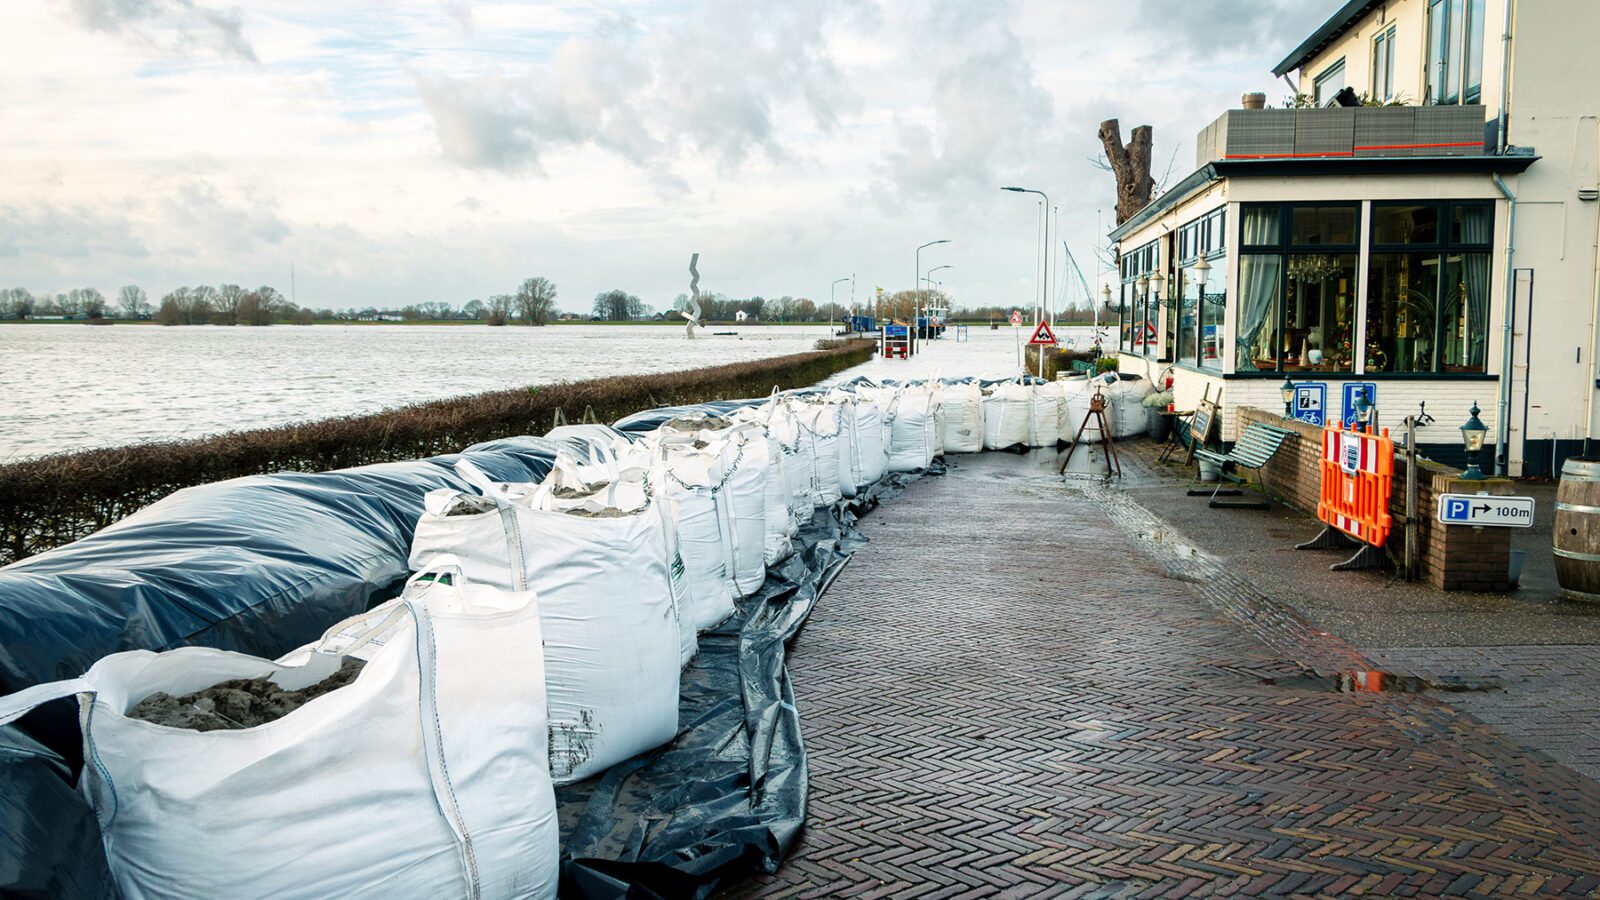 Sandbags for the houses to prevent flooding due to the excessive rainfall and the rising water